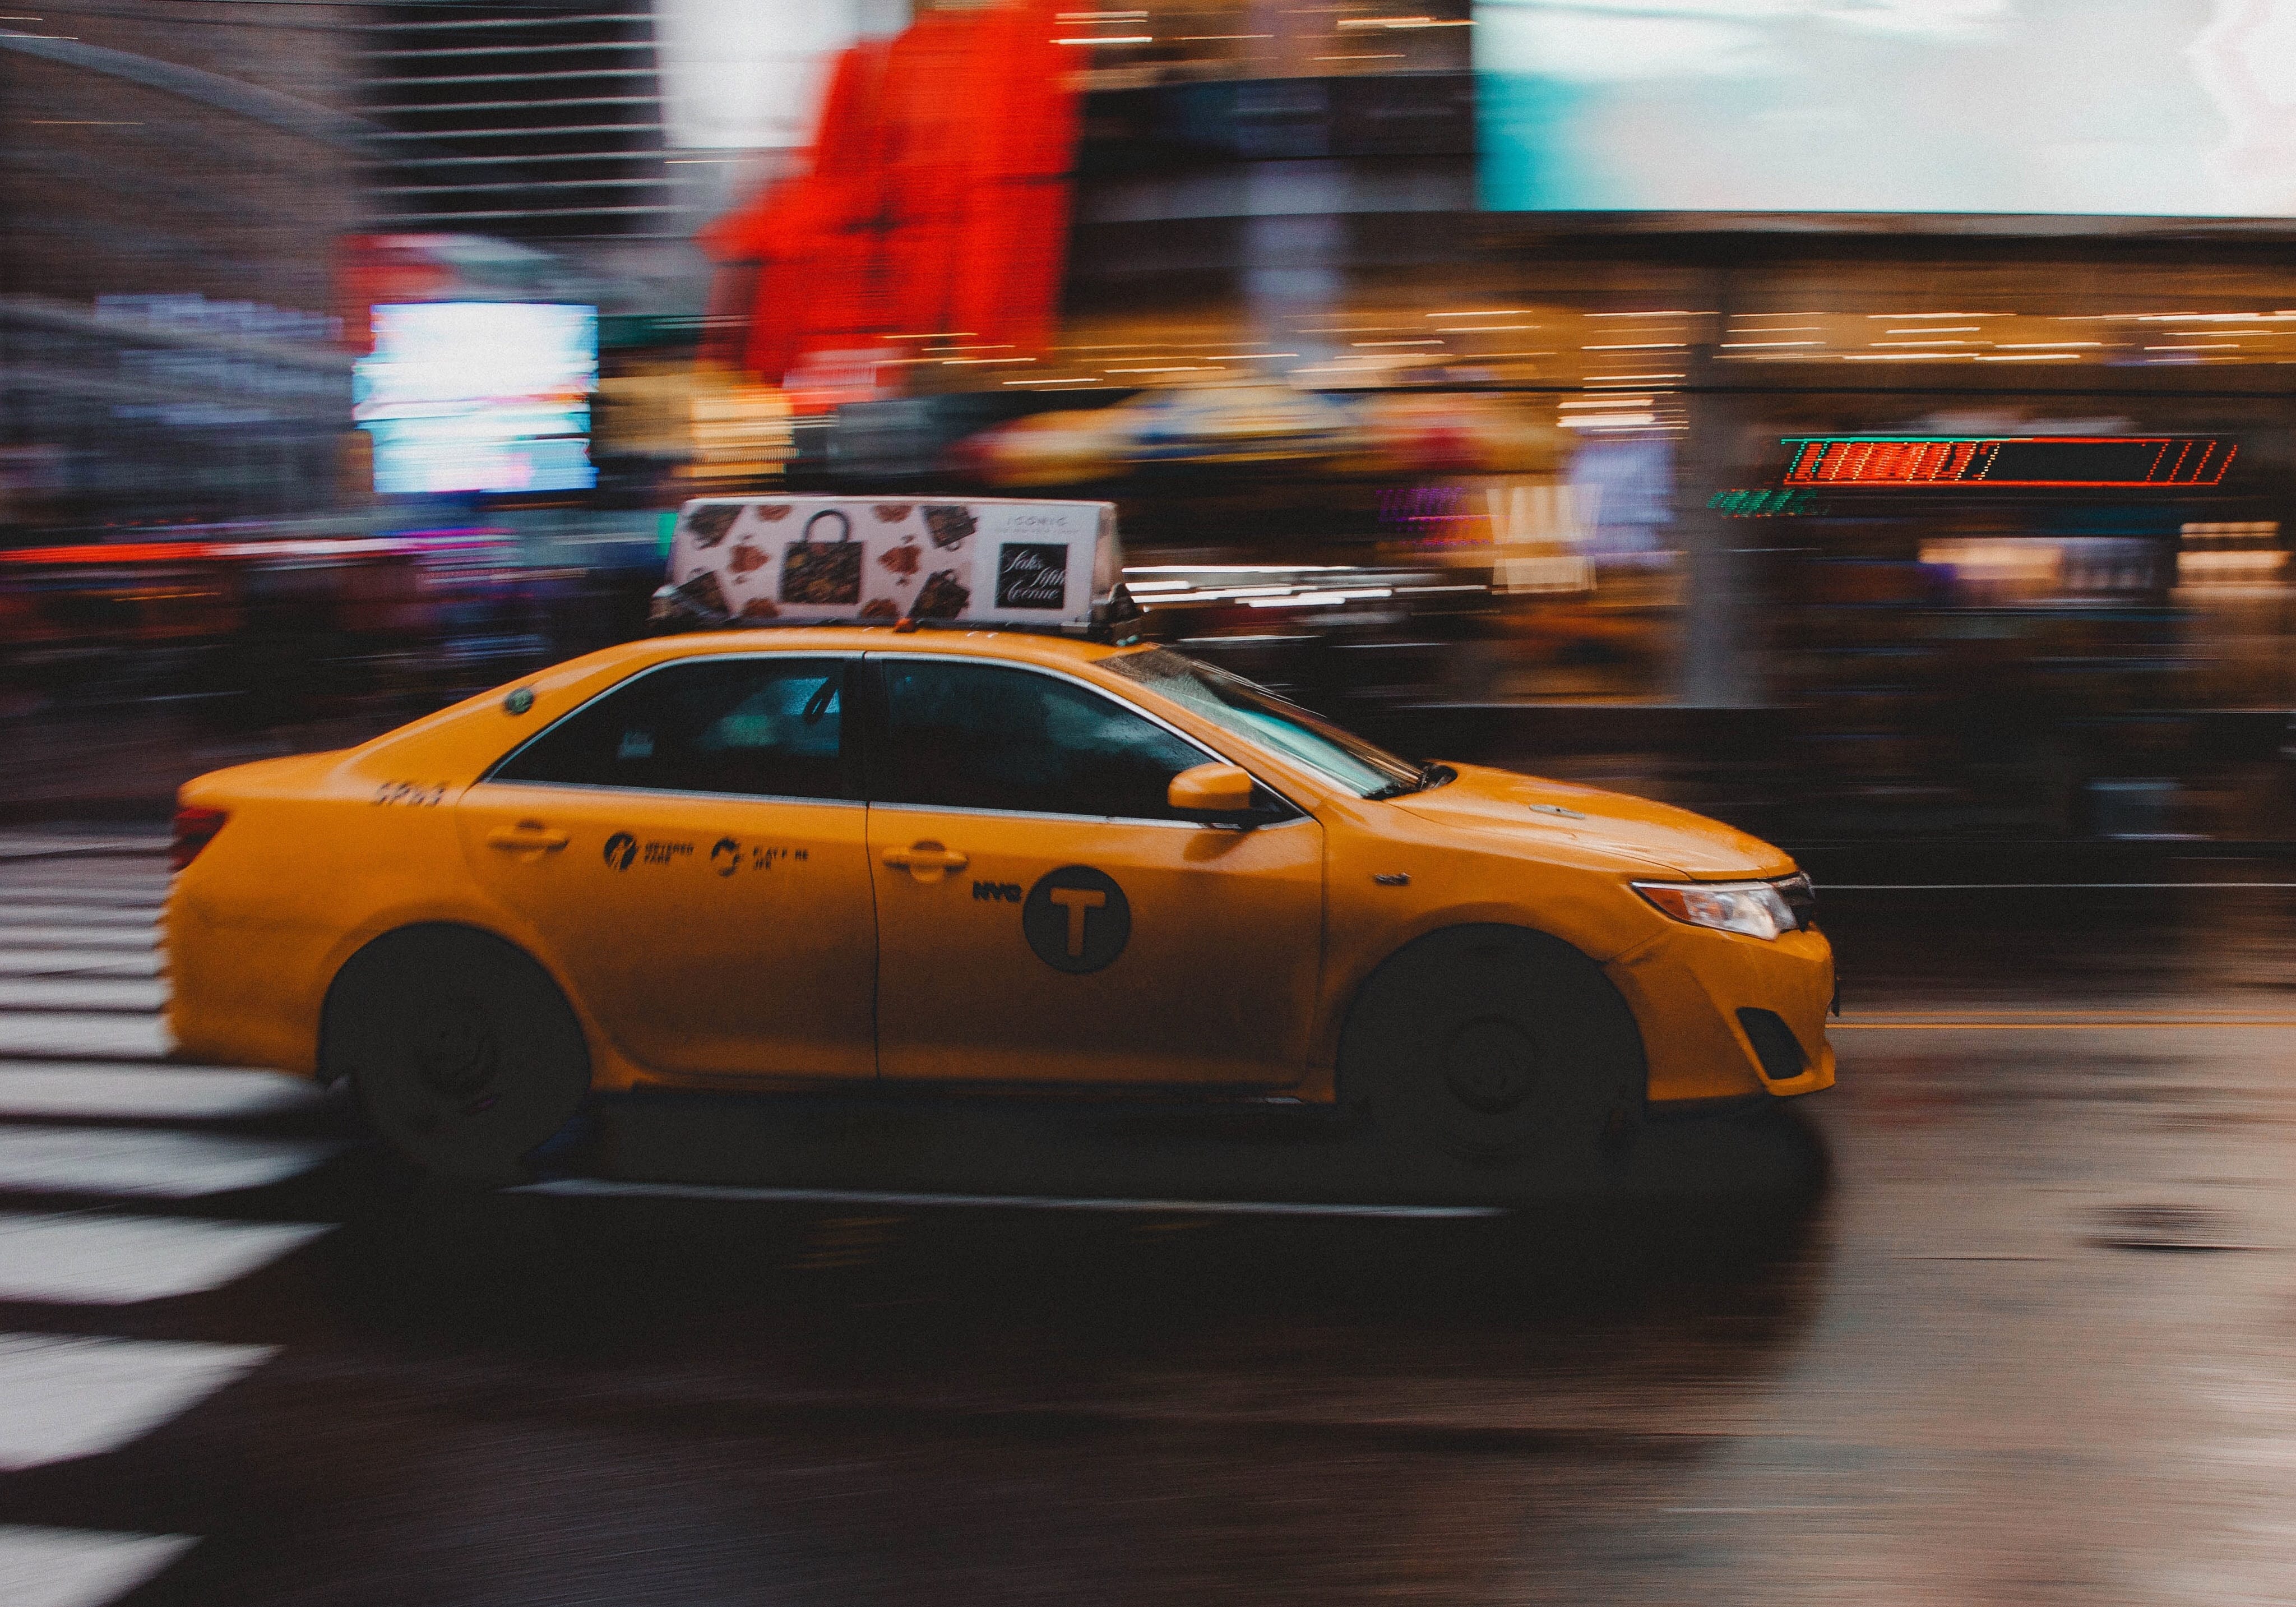 Yellow taxi driving down street, scenery blurred; image by @gehartyler, via Unsplash.com.